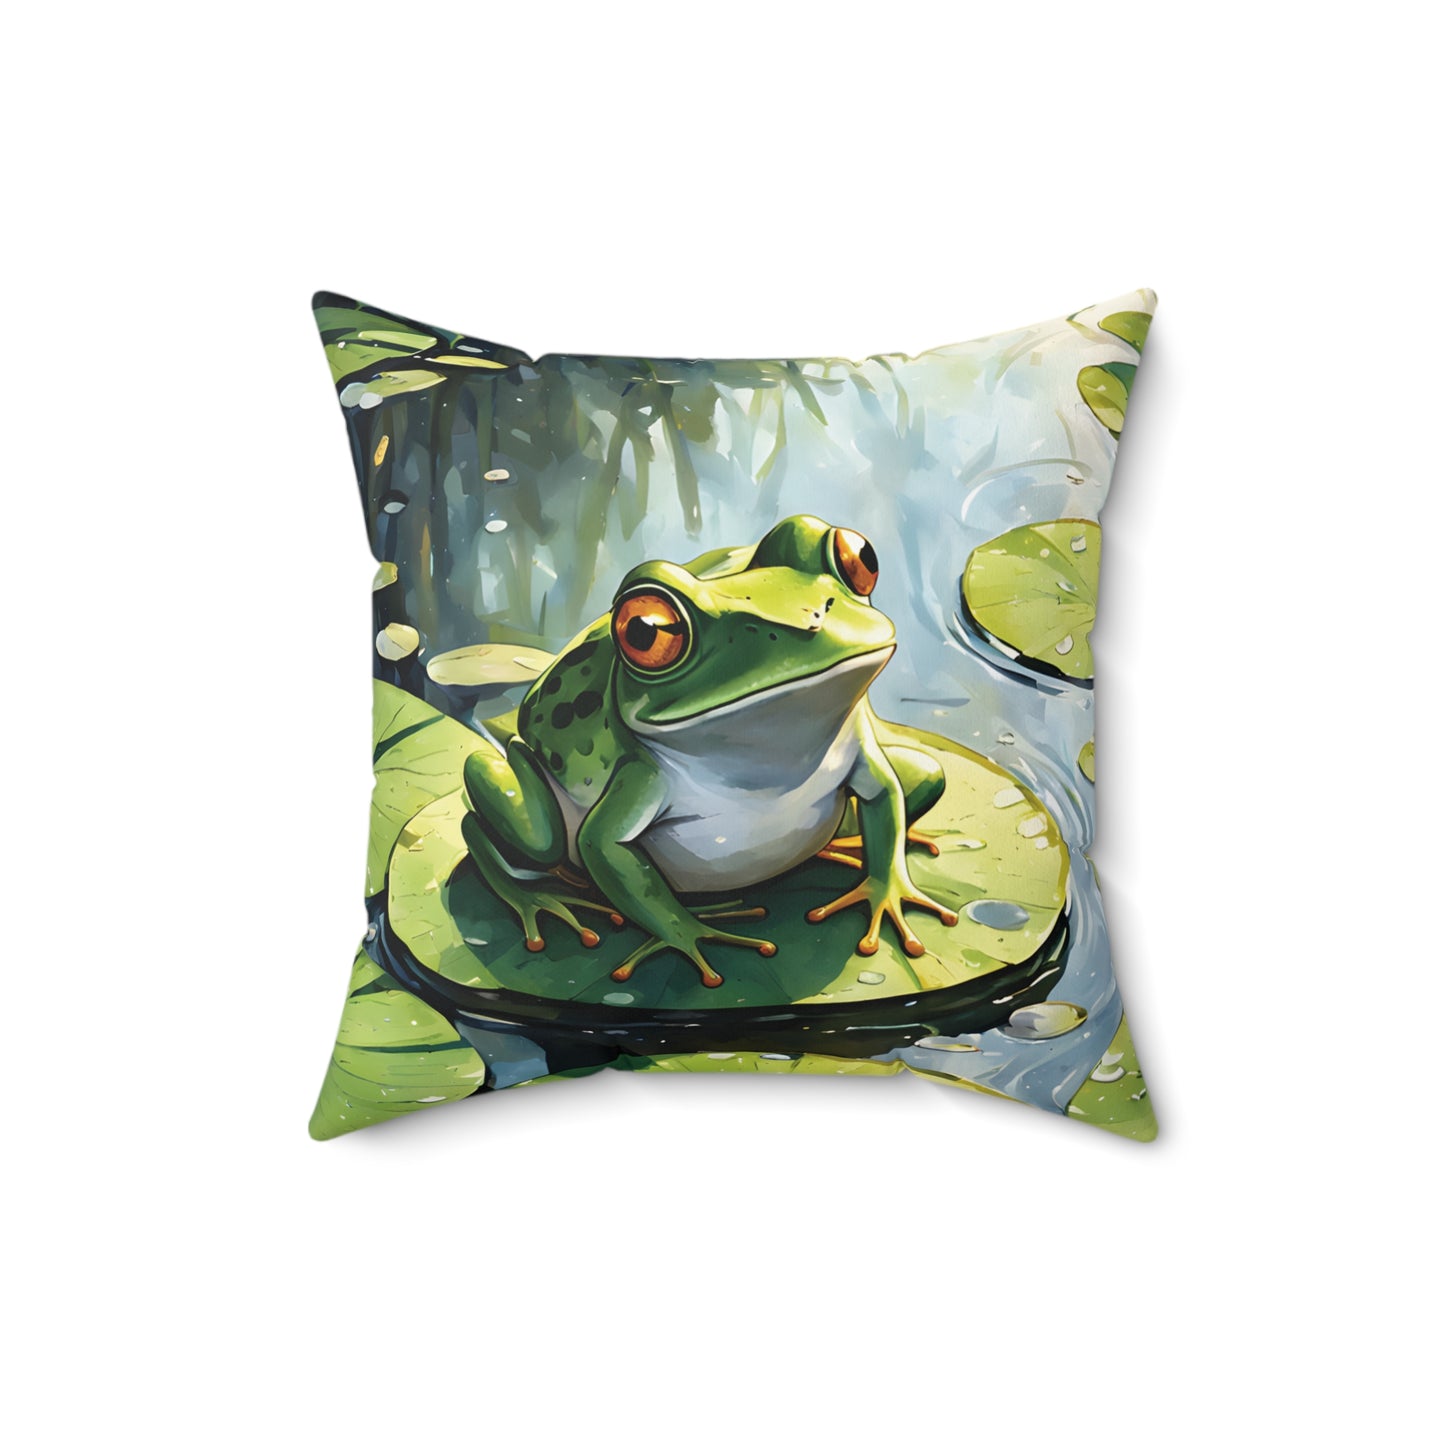 Friendly Frog Square Pillow